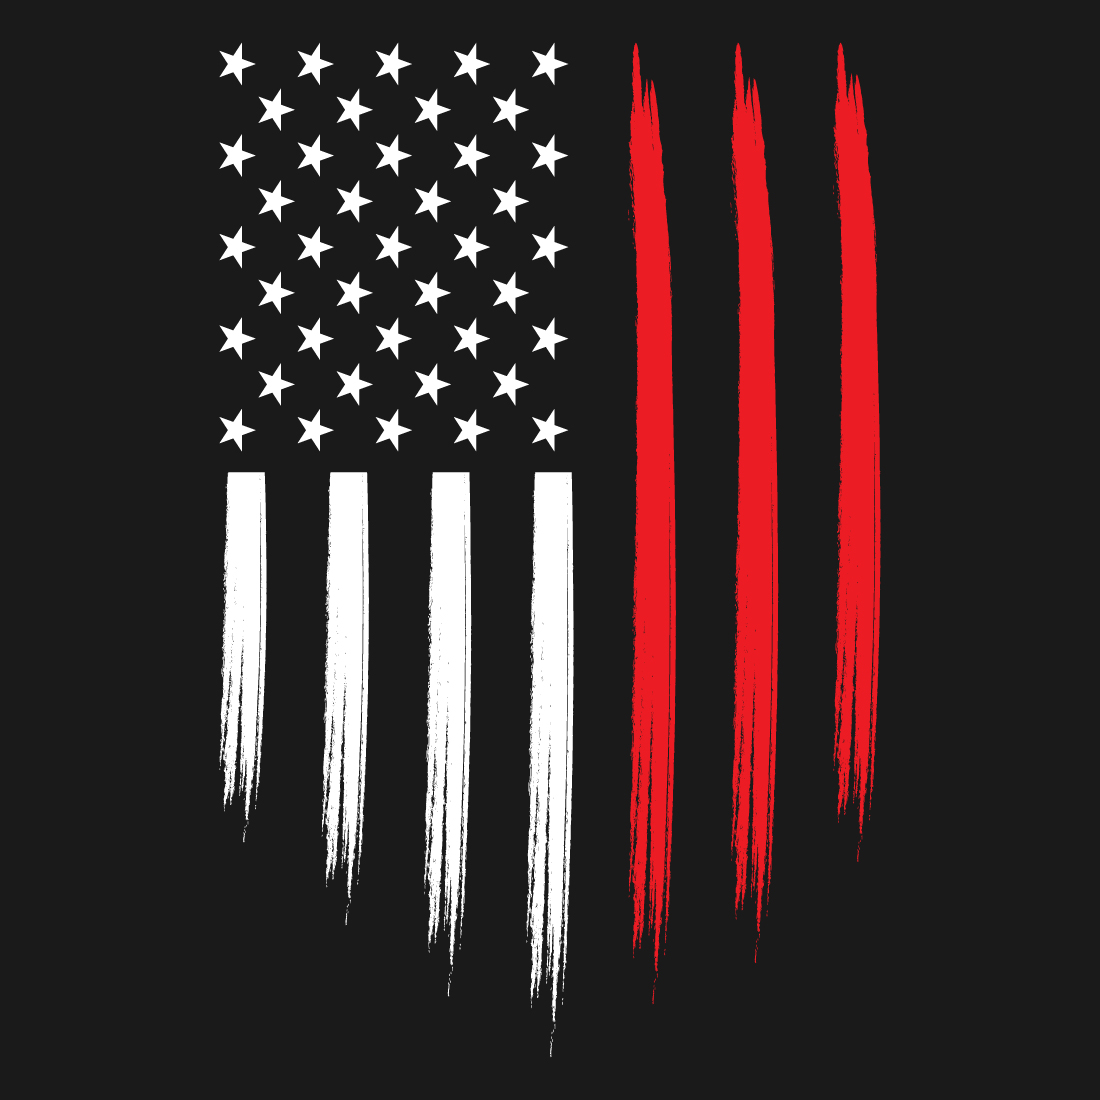 Gorgeous image with the American flag on a black background.